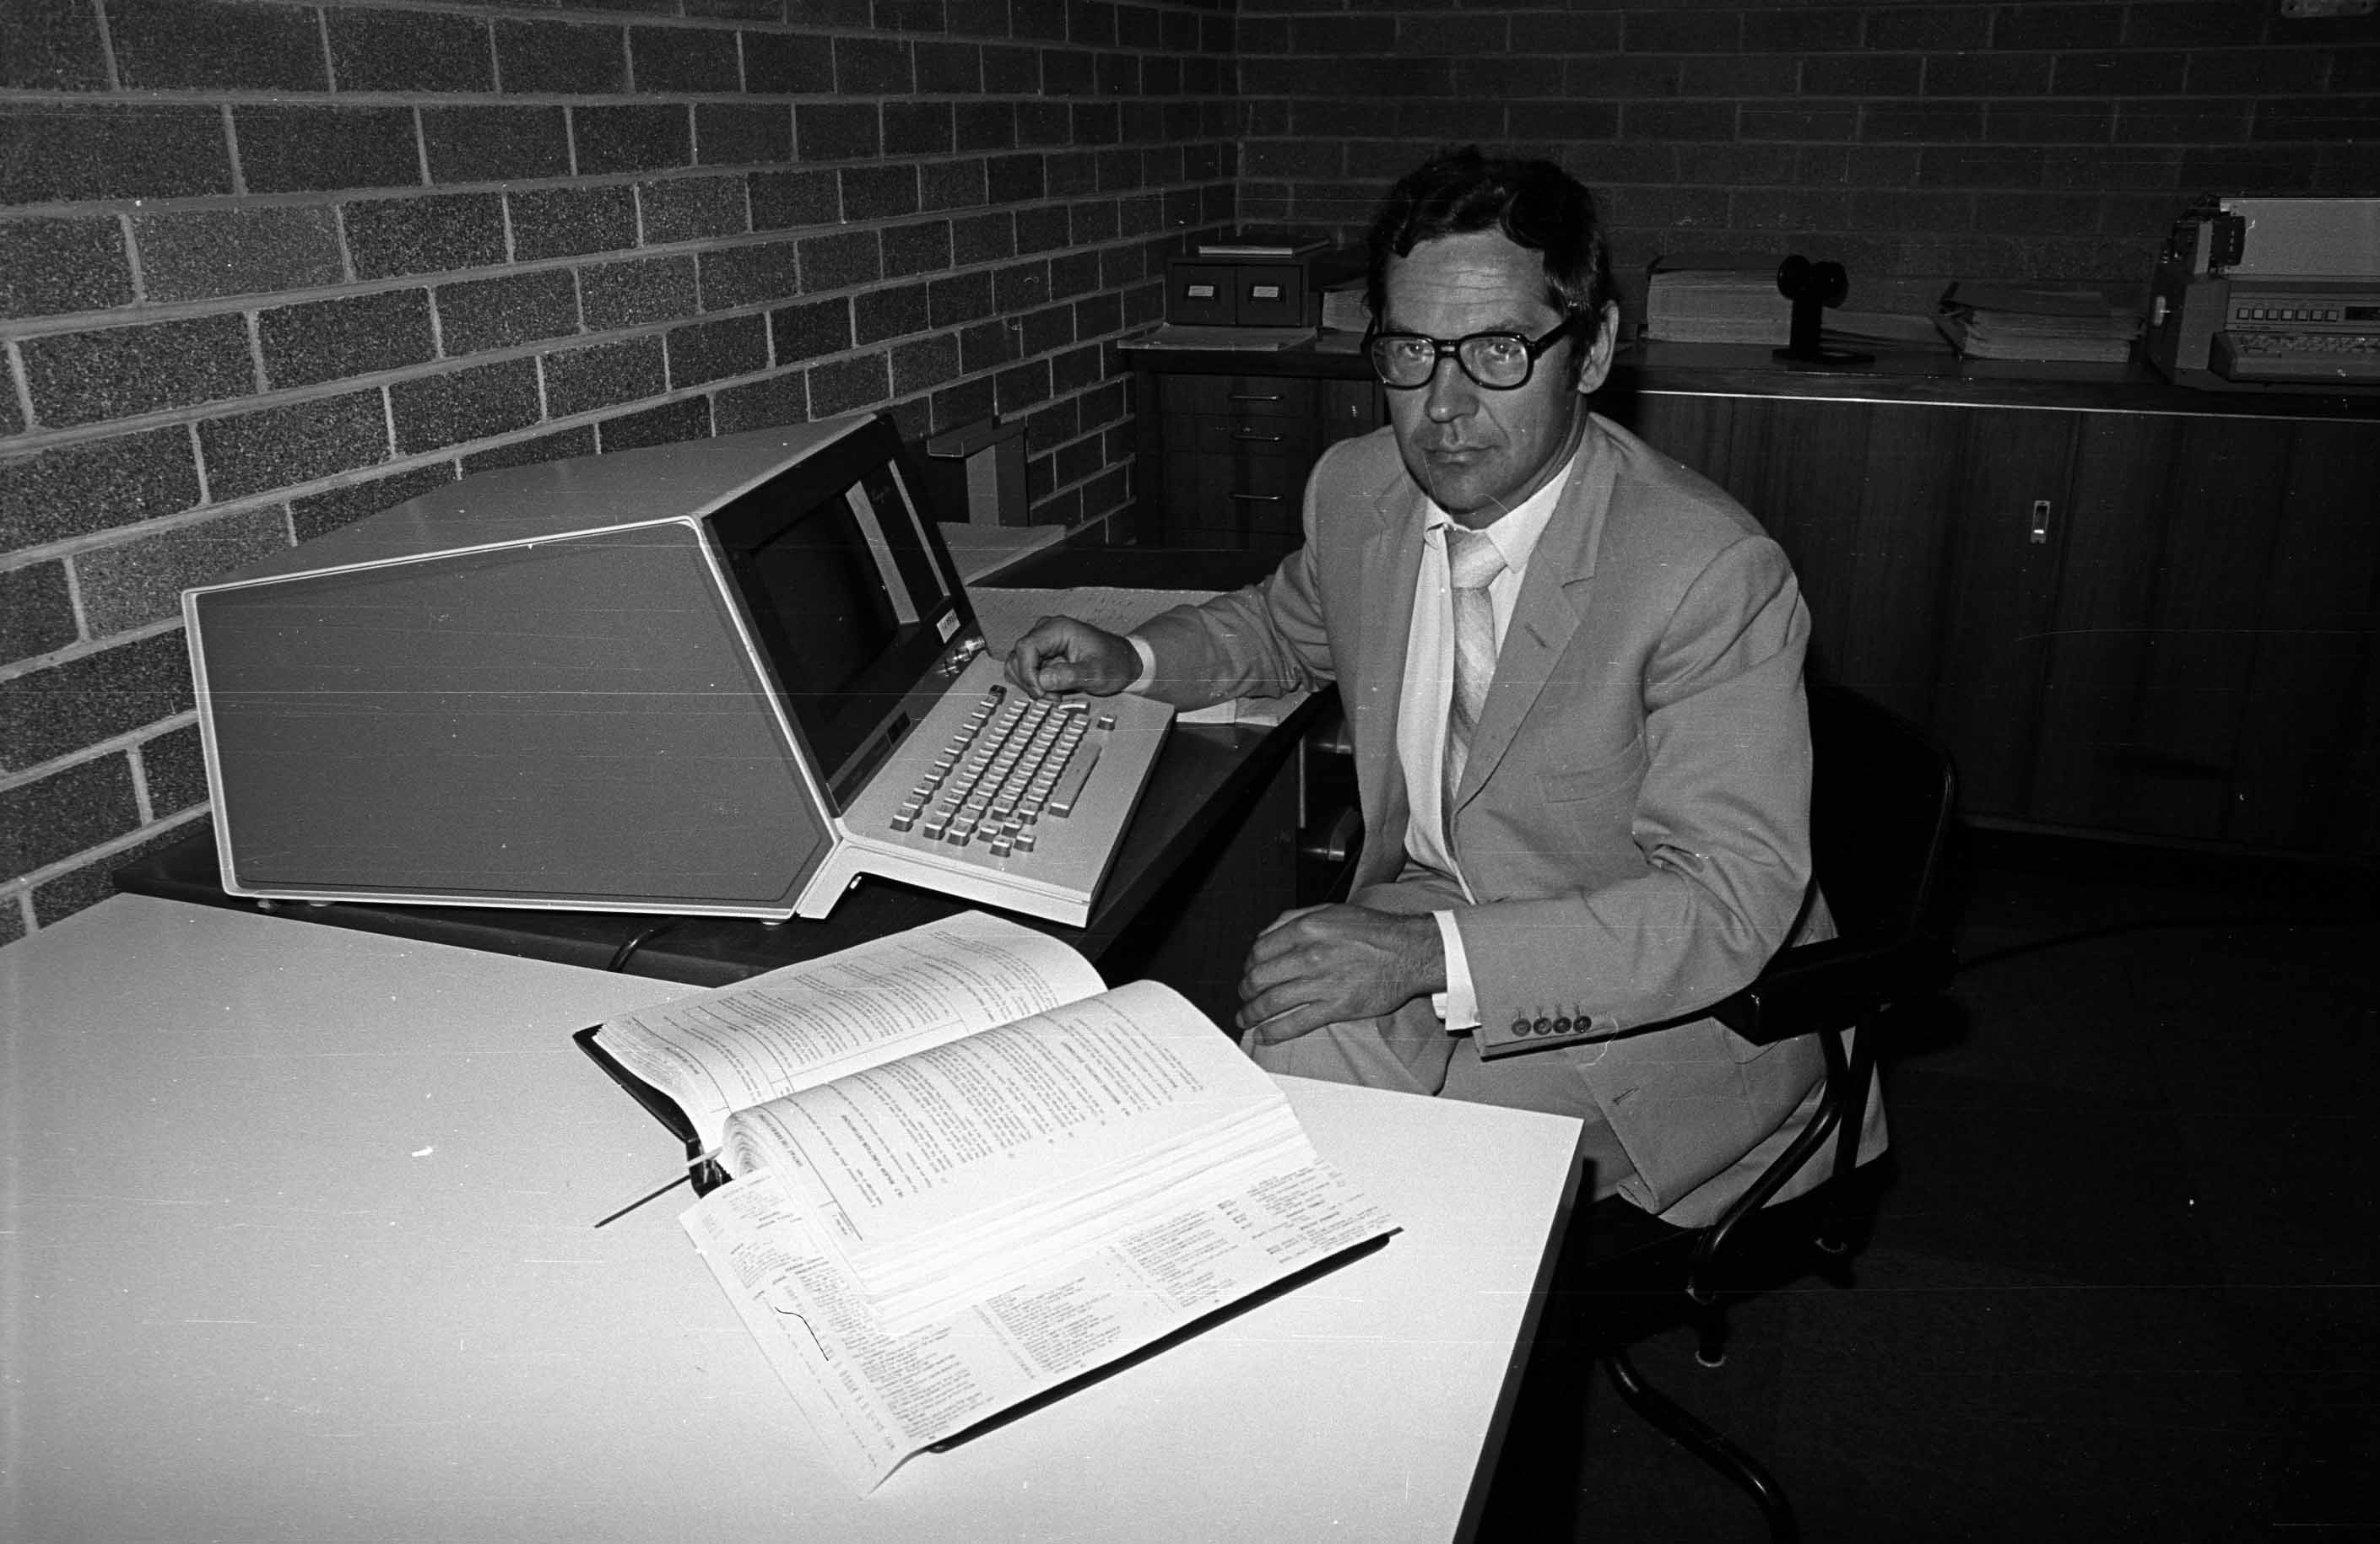 Professor Reinfelds helped establish an international reputation in the field of computer science for the University of Wollongong